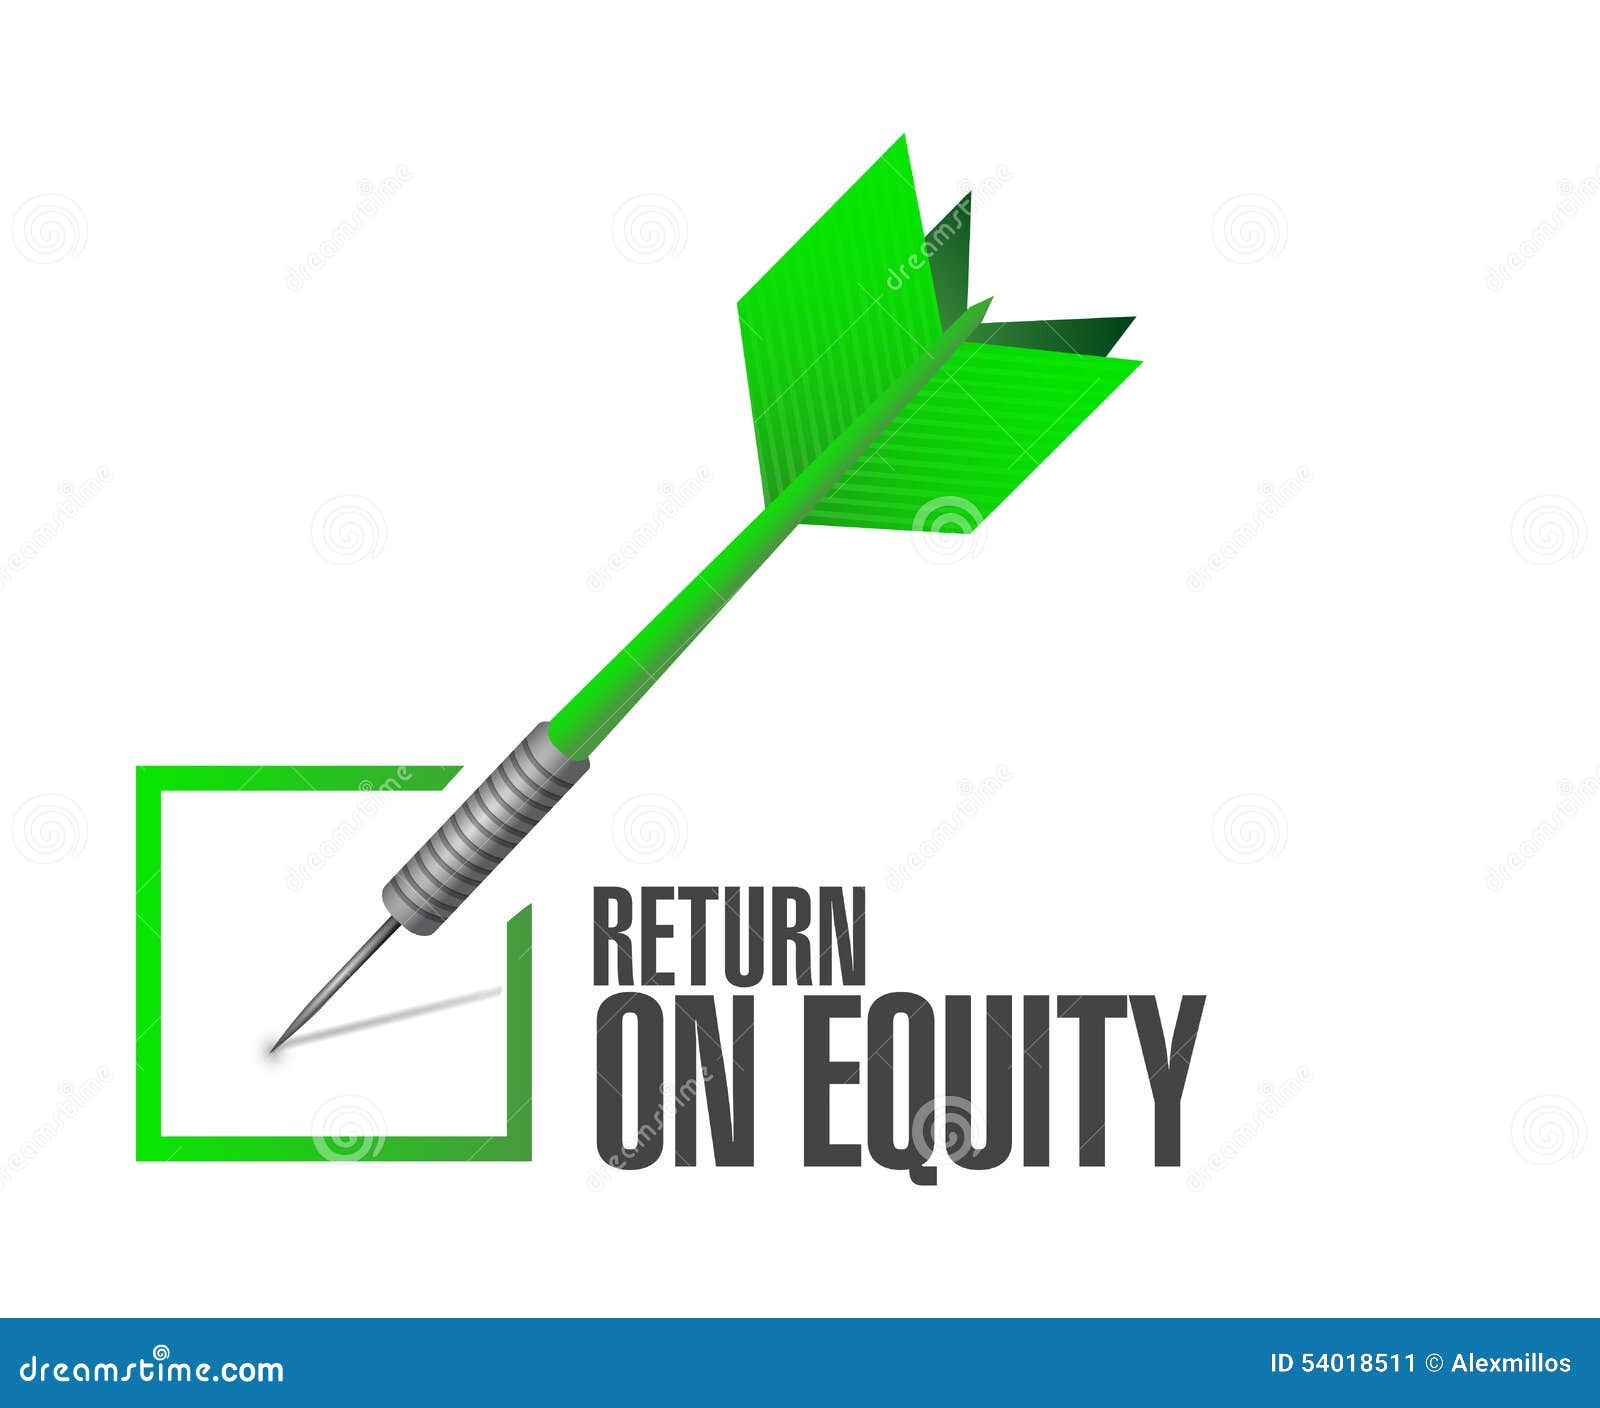 clipart home equity - photo #12